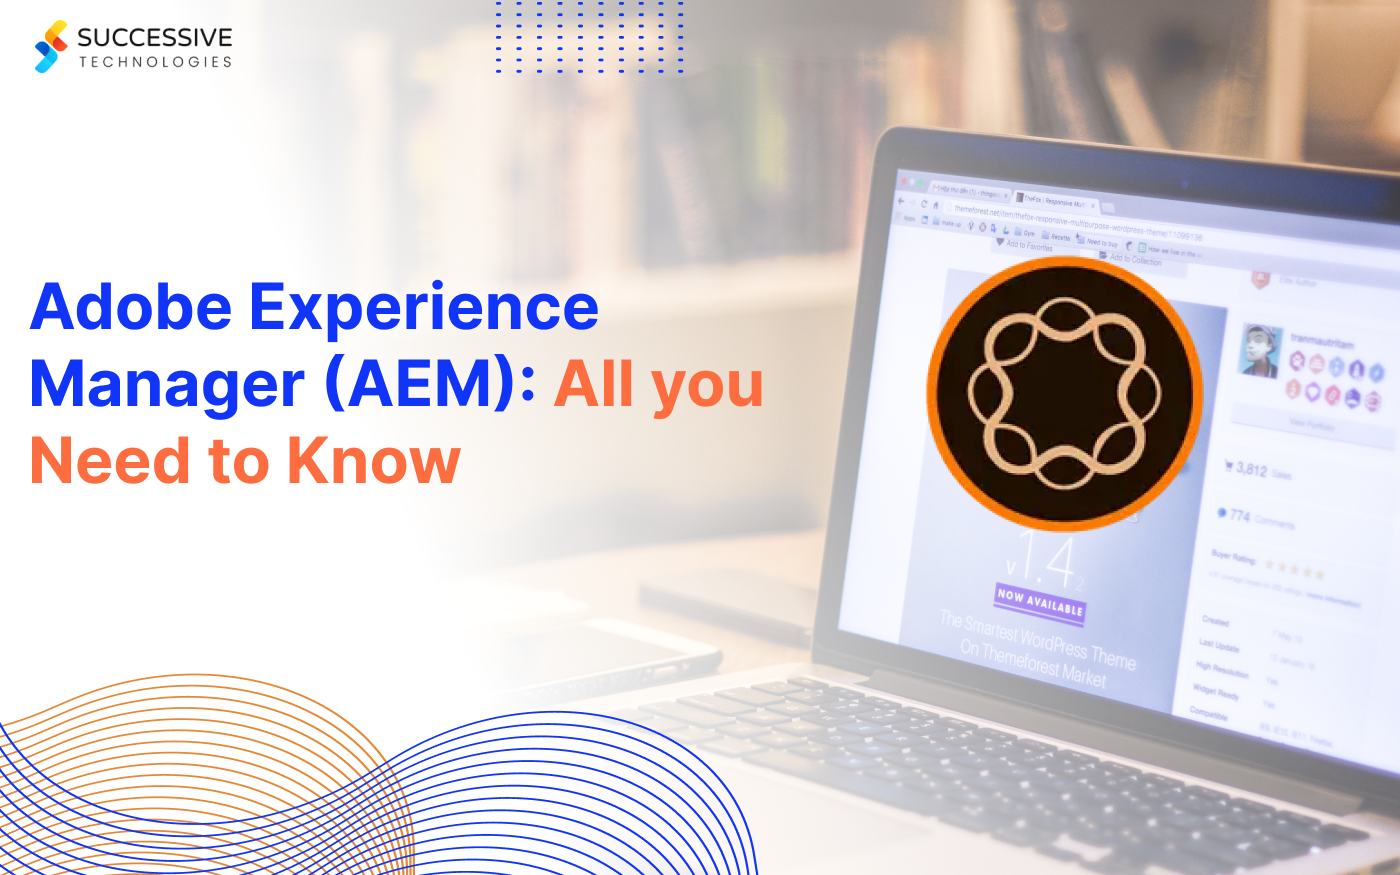 Adobe Experience Manager (AEM): All you need to know